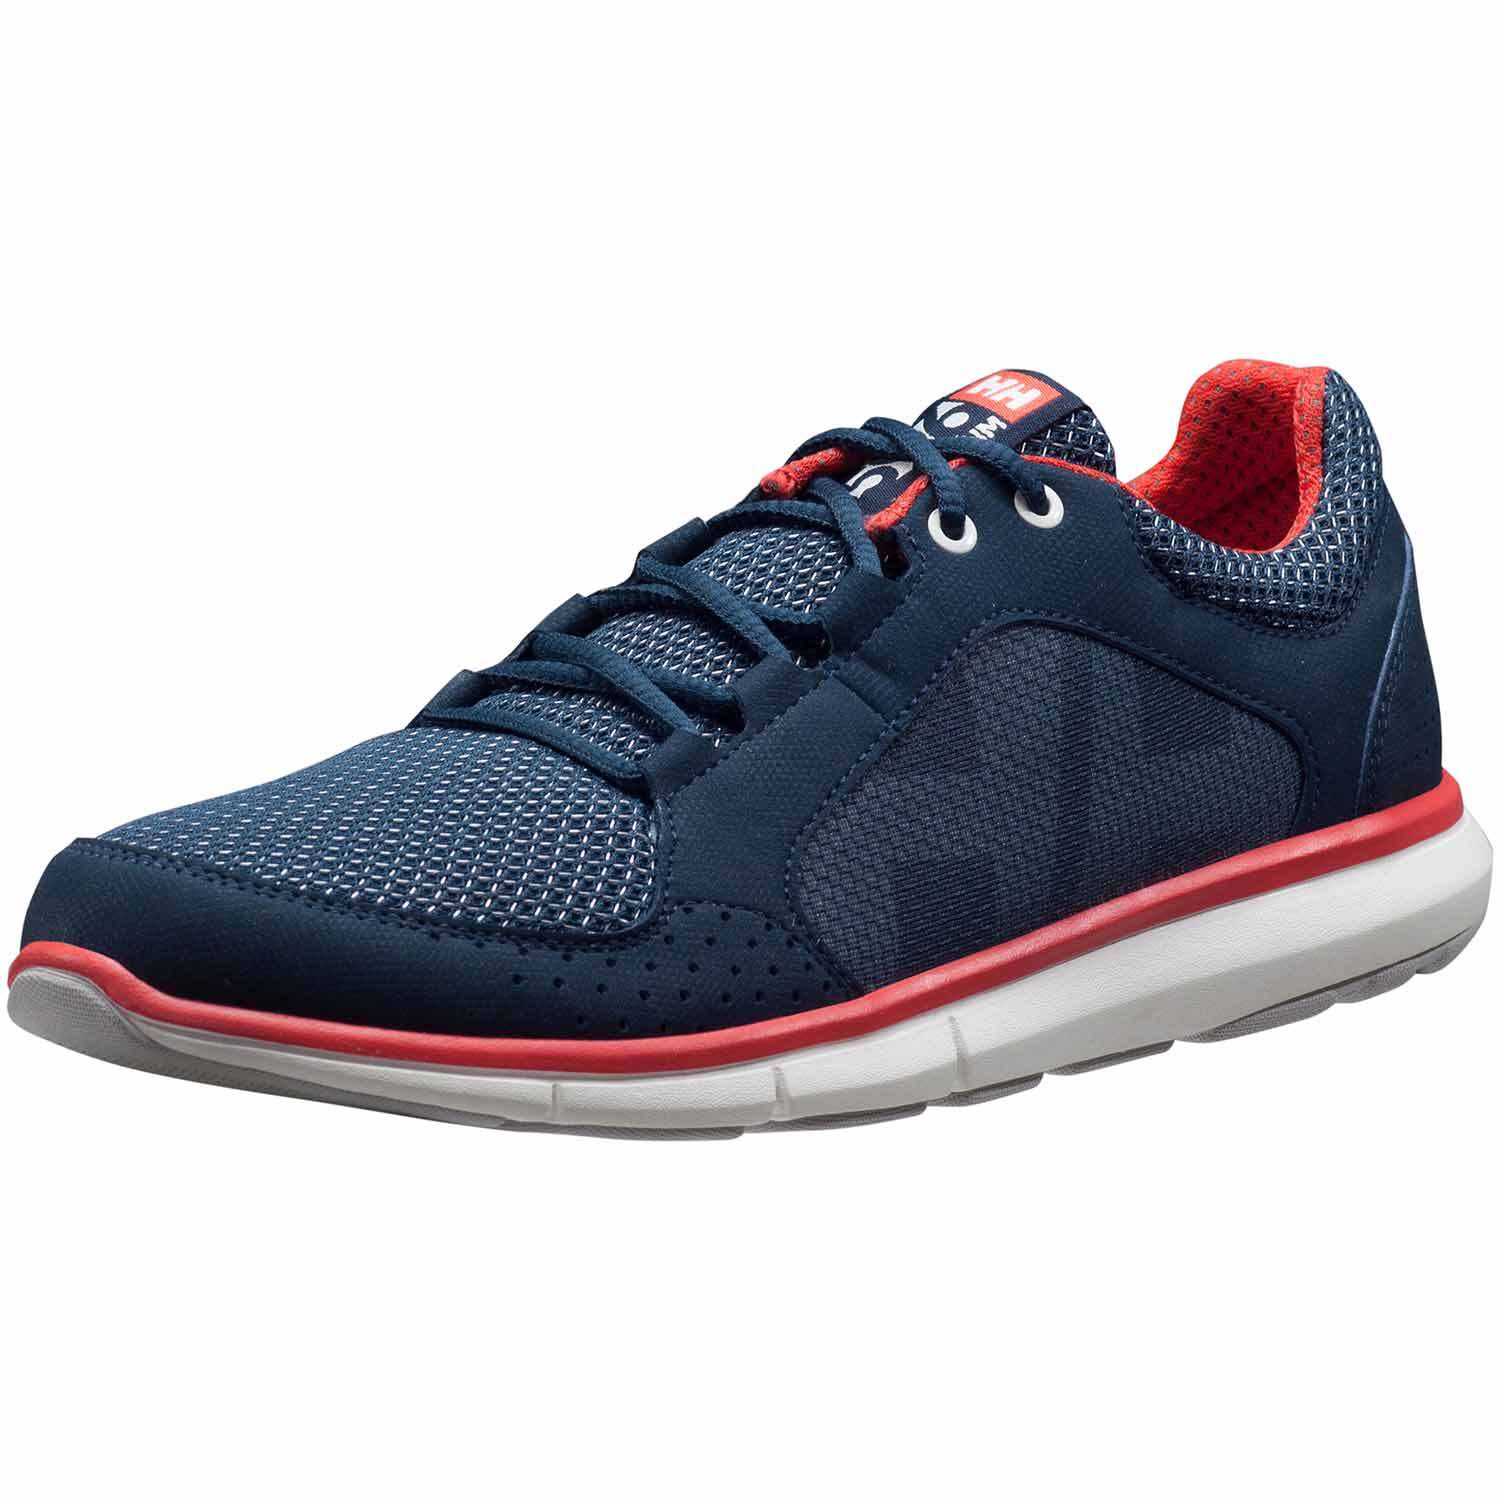 Navy Flag Red Quick Dry Helly Hansen Ahiga V4 Hydropower Sailing Yachting and Dinghy Shoes Unisex 